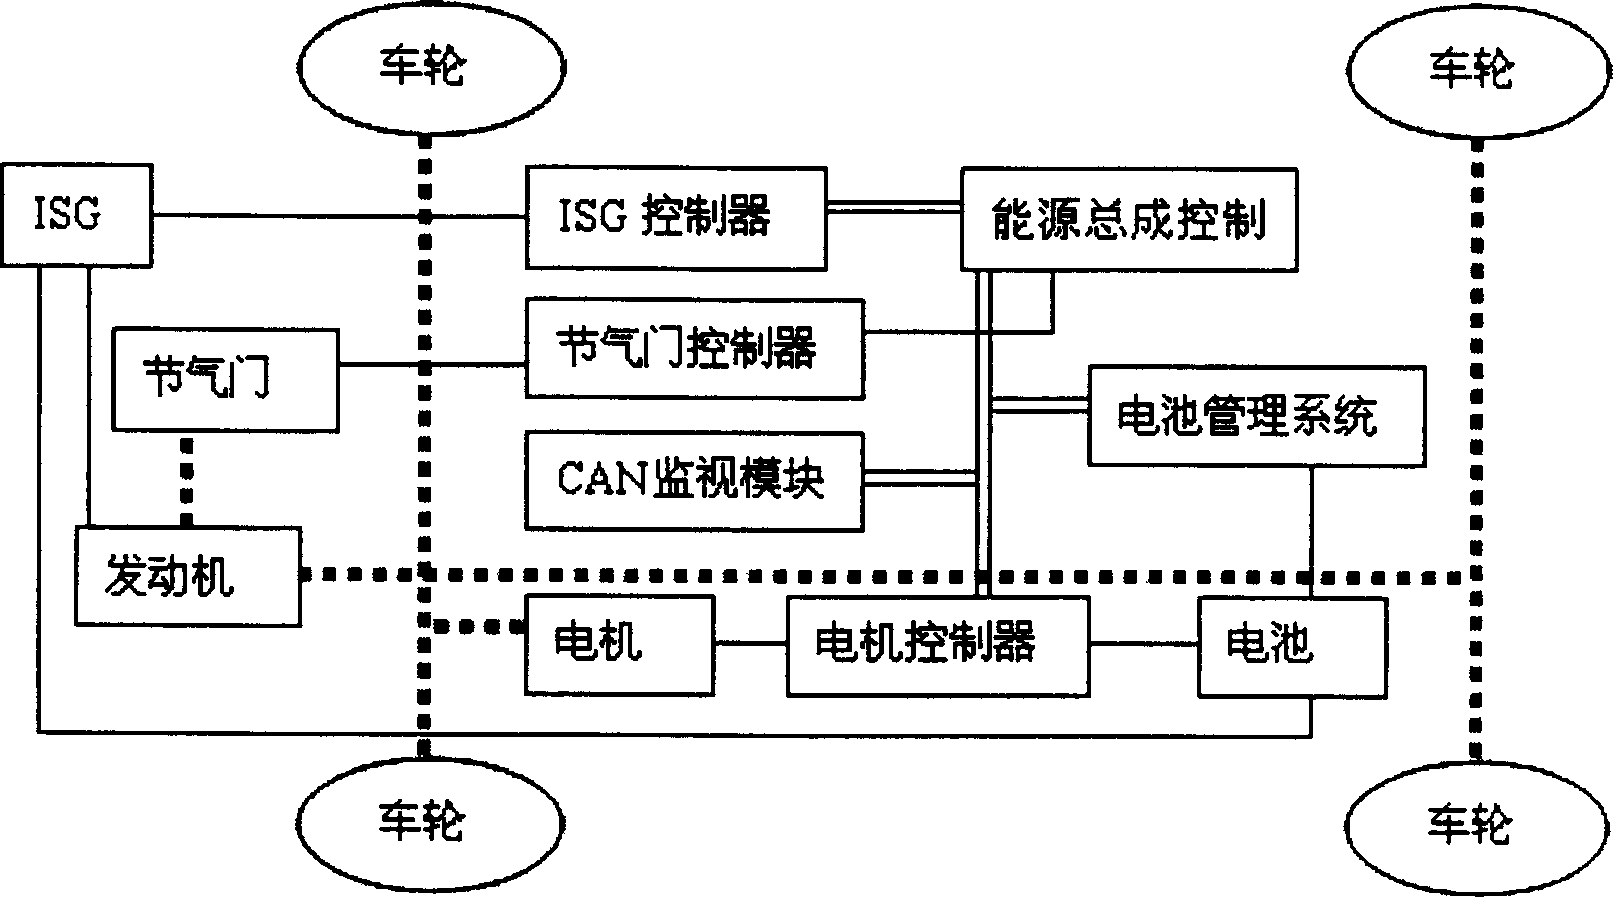 Local network structure of mixed dynamic vehicle controller